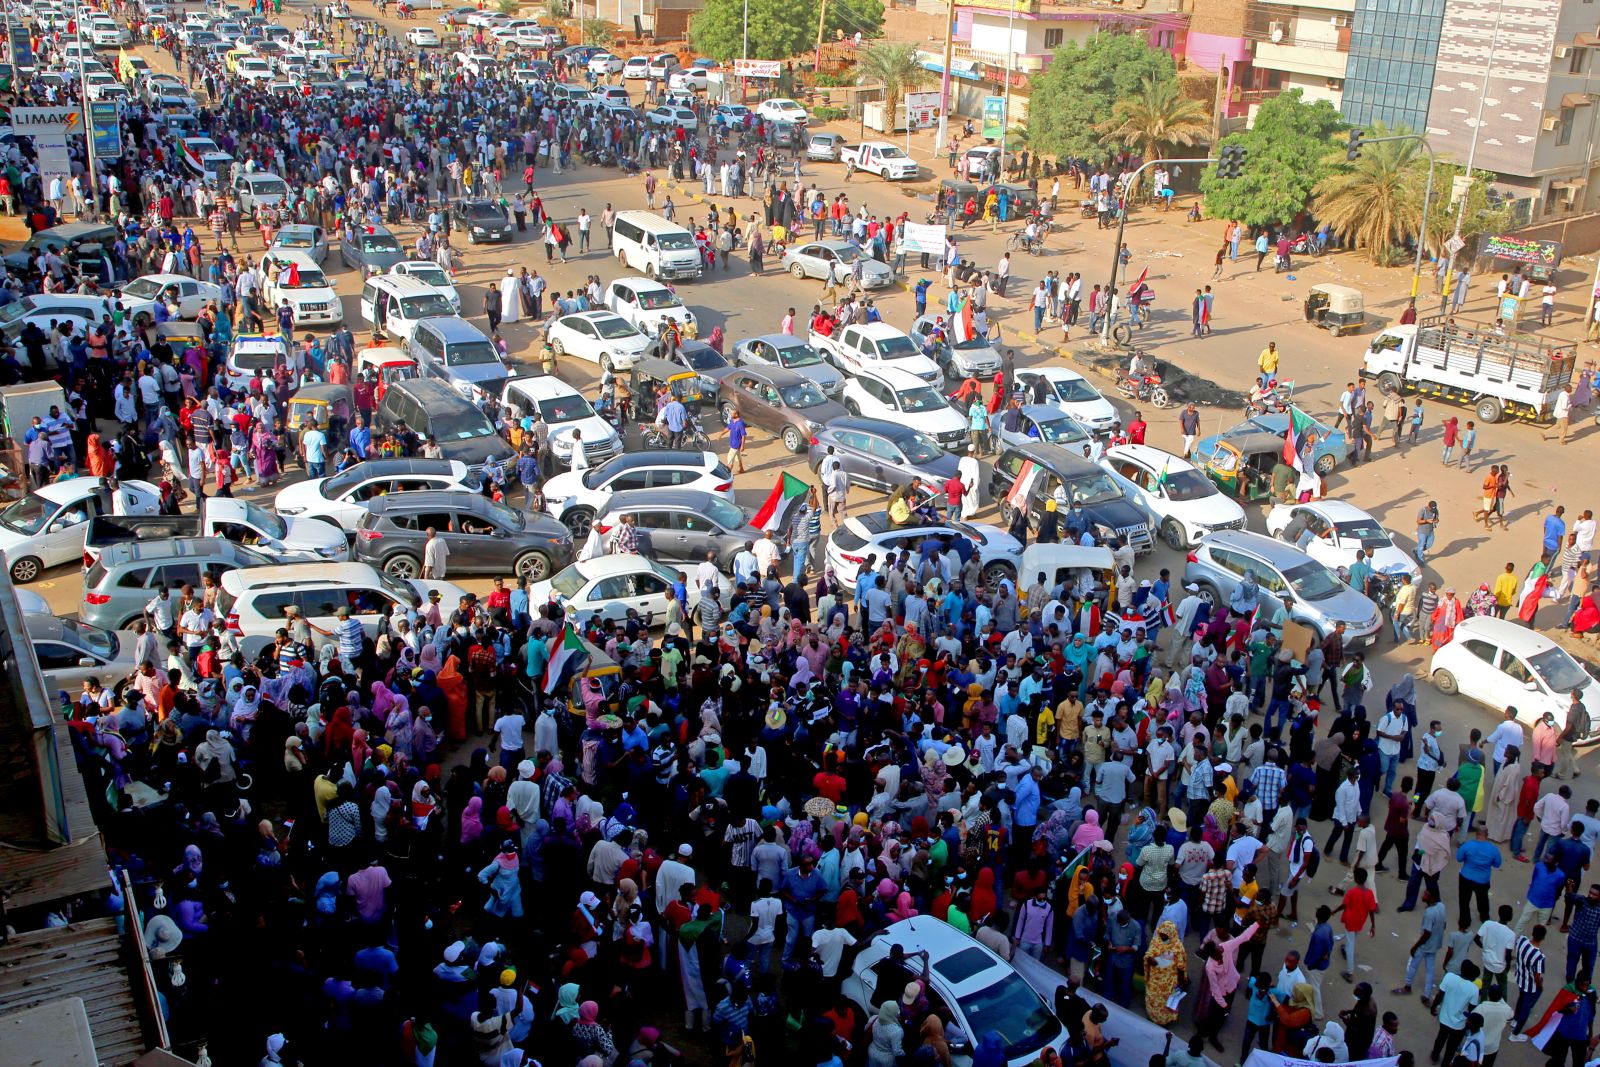 epa09537118 People attend demonstrations in support of the civilian government, in Khartoum, Sudan, 21 October 2021. Thousands of people marched during a demonstration called by the Alliance of Forces for Freedom and Change, the Central Council Group to support the government of Abdullah Hamdok, while the army and police forces closed the roads leading to government headquarters and main markets.  EPA/MOHAMMED ABU OBAID